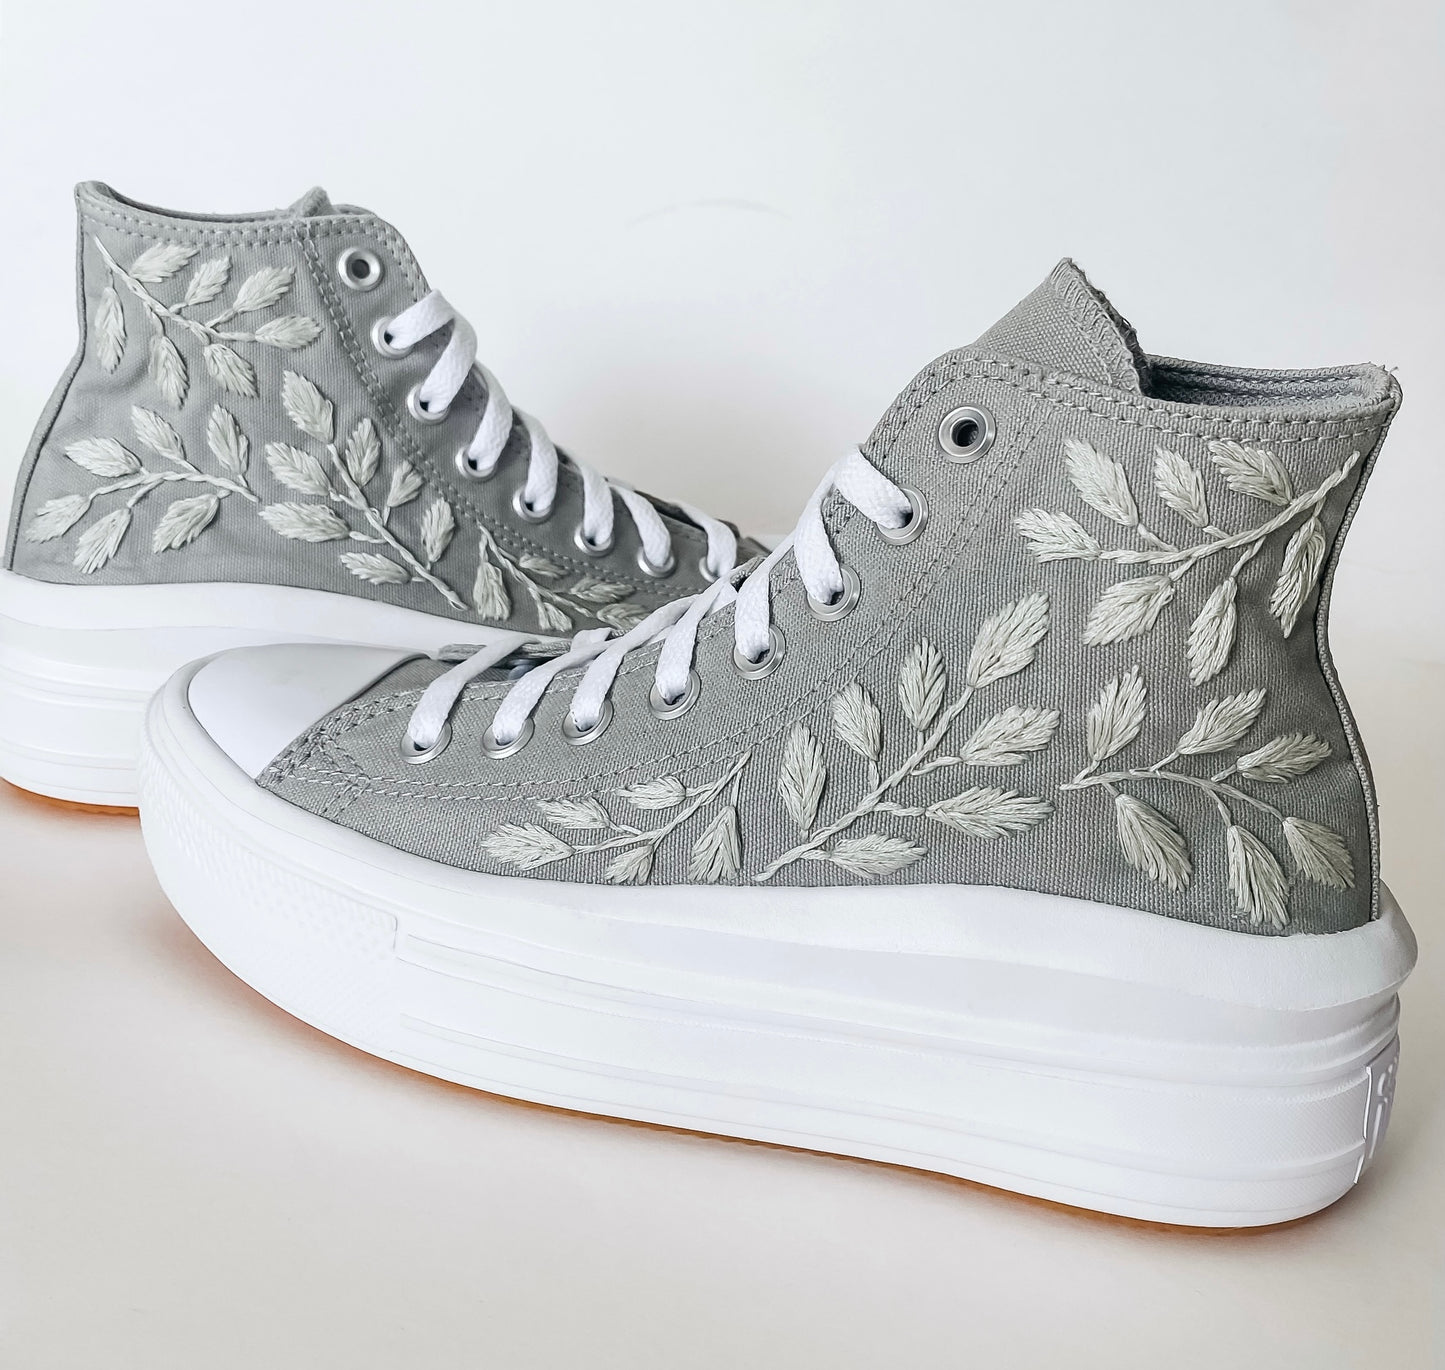 Leafy High Tops Converse PDF Embroidery Pattern